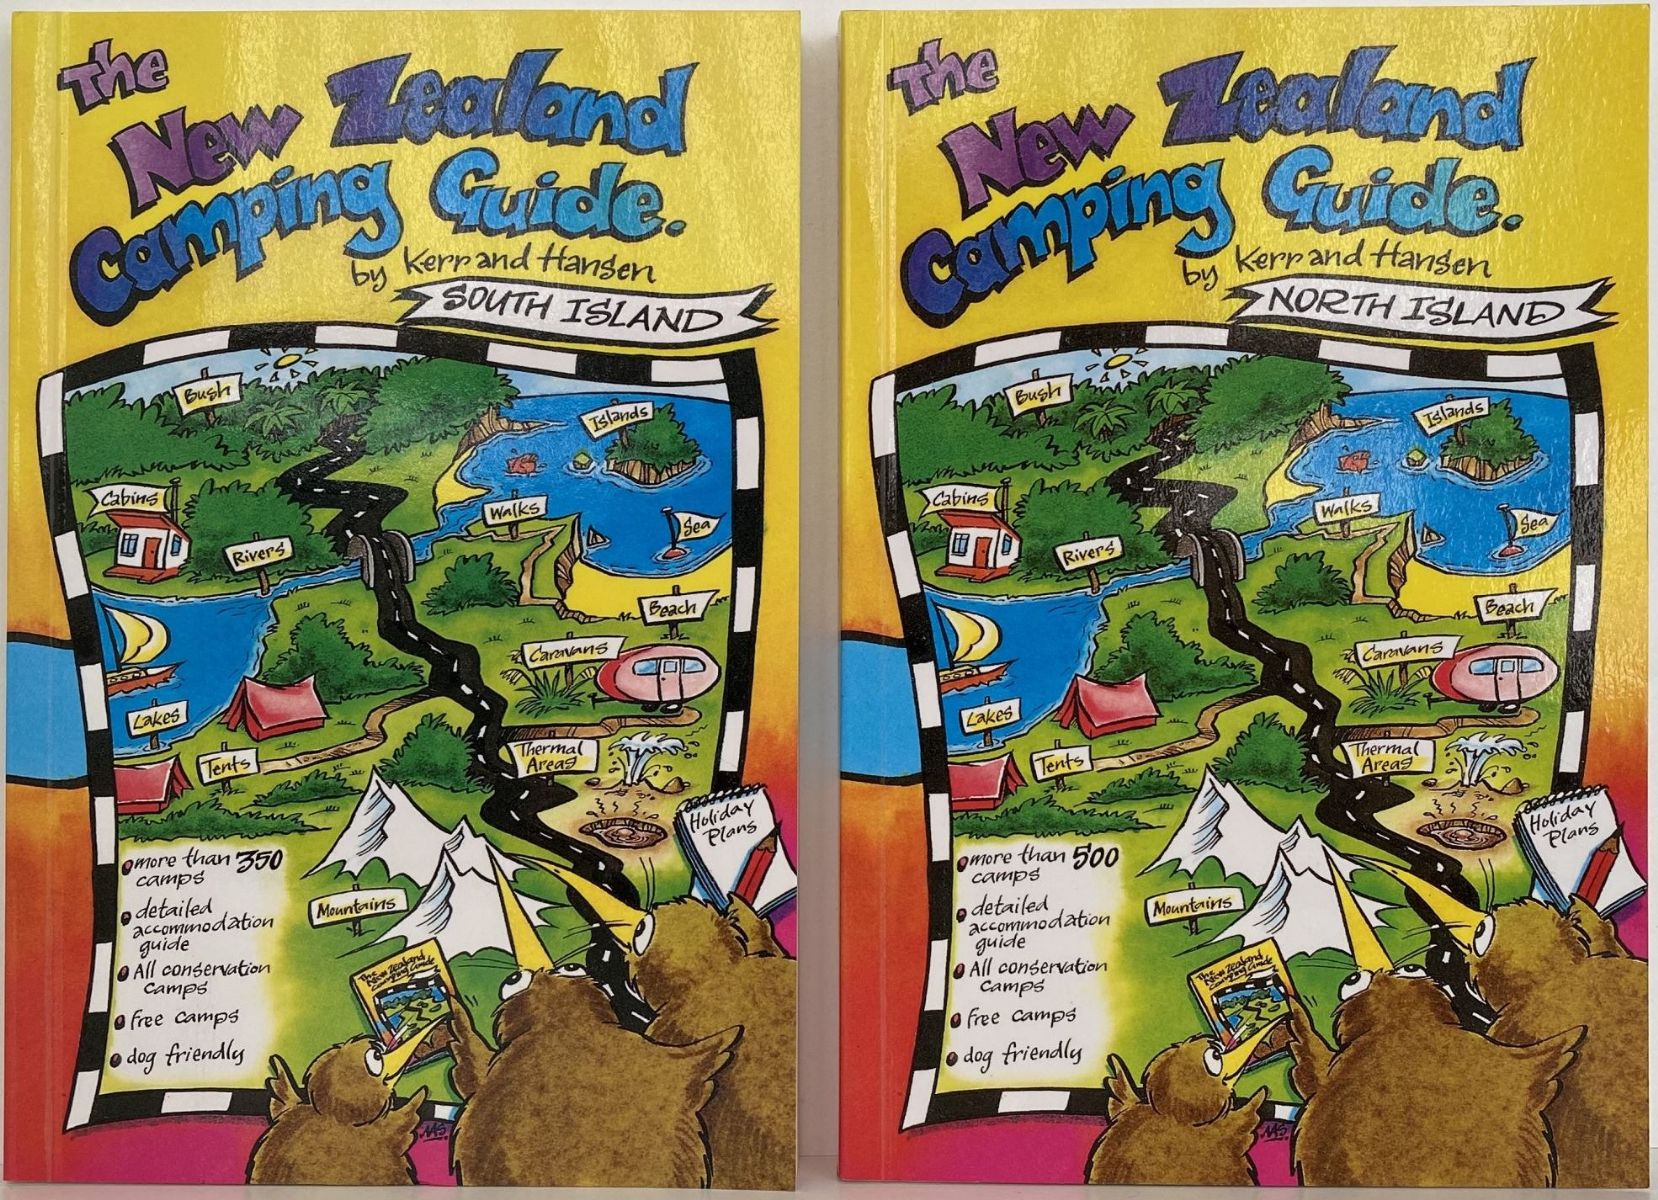 THE NEW ZEALAND CAMPING GUIDE: North & South Islands 2001